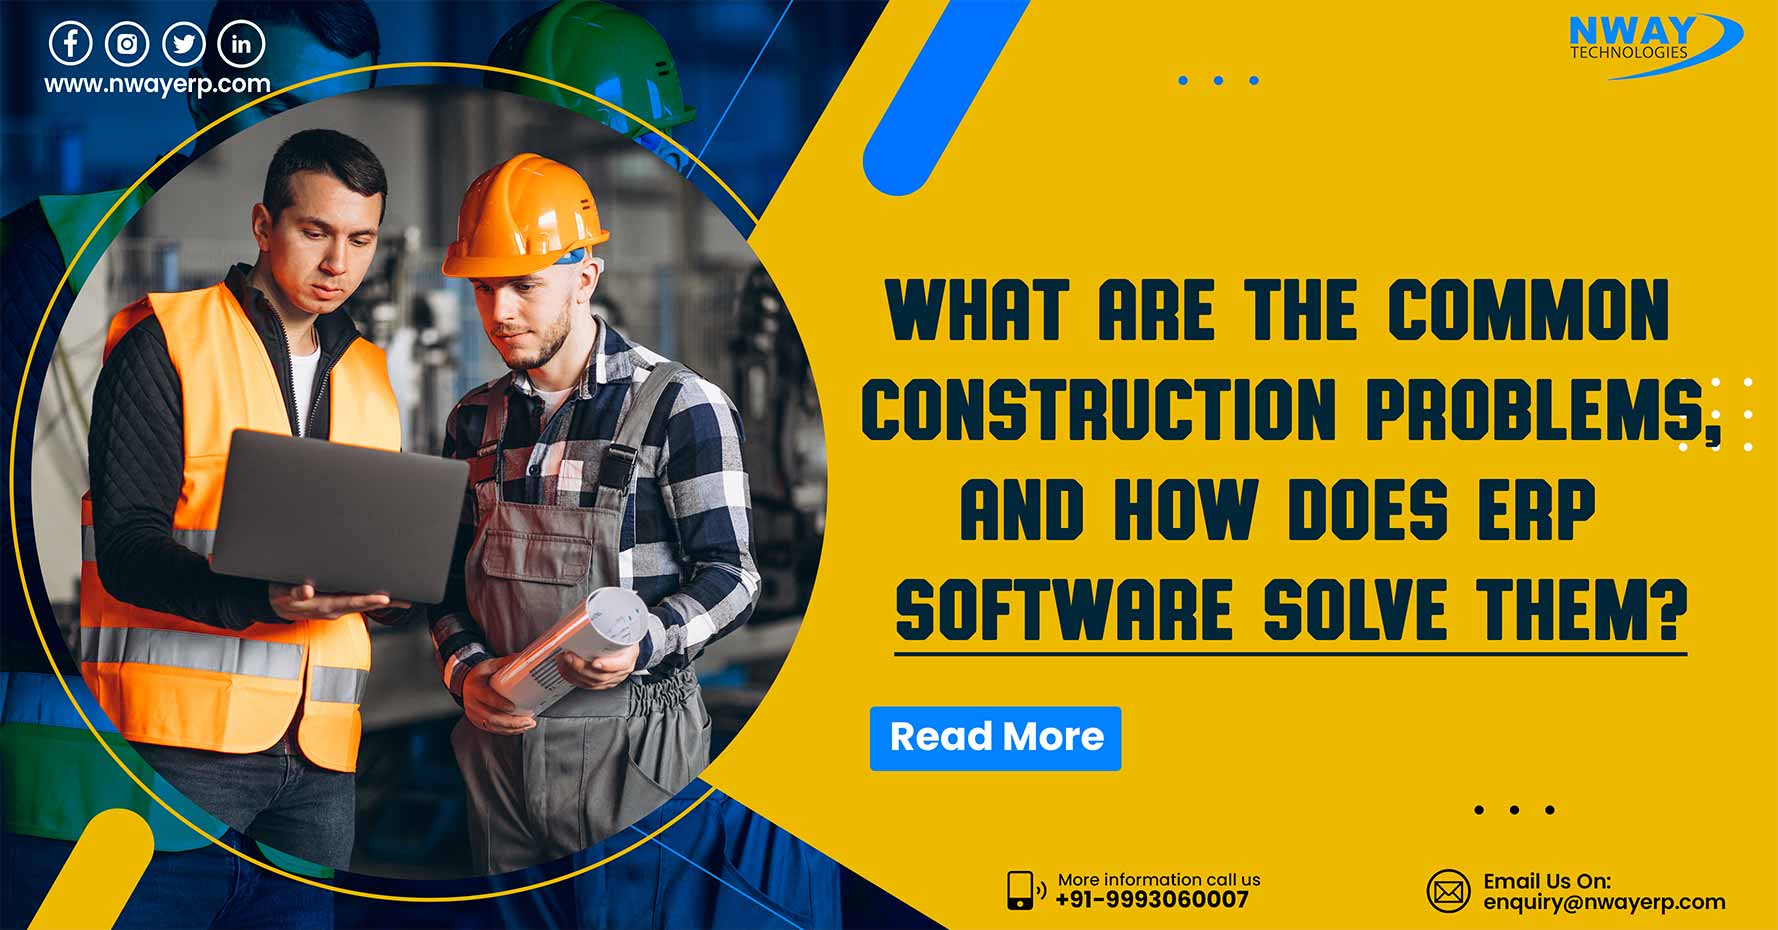 What Are the Common Construction Problems and How Does ERP Software Solve Them?